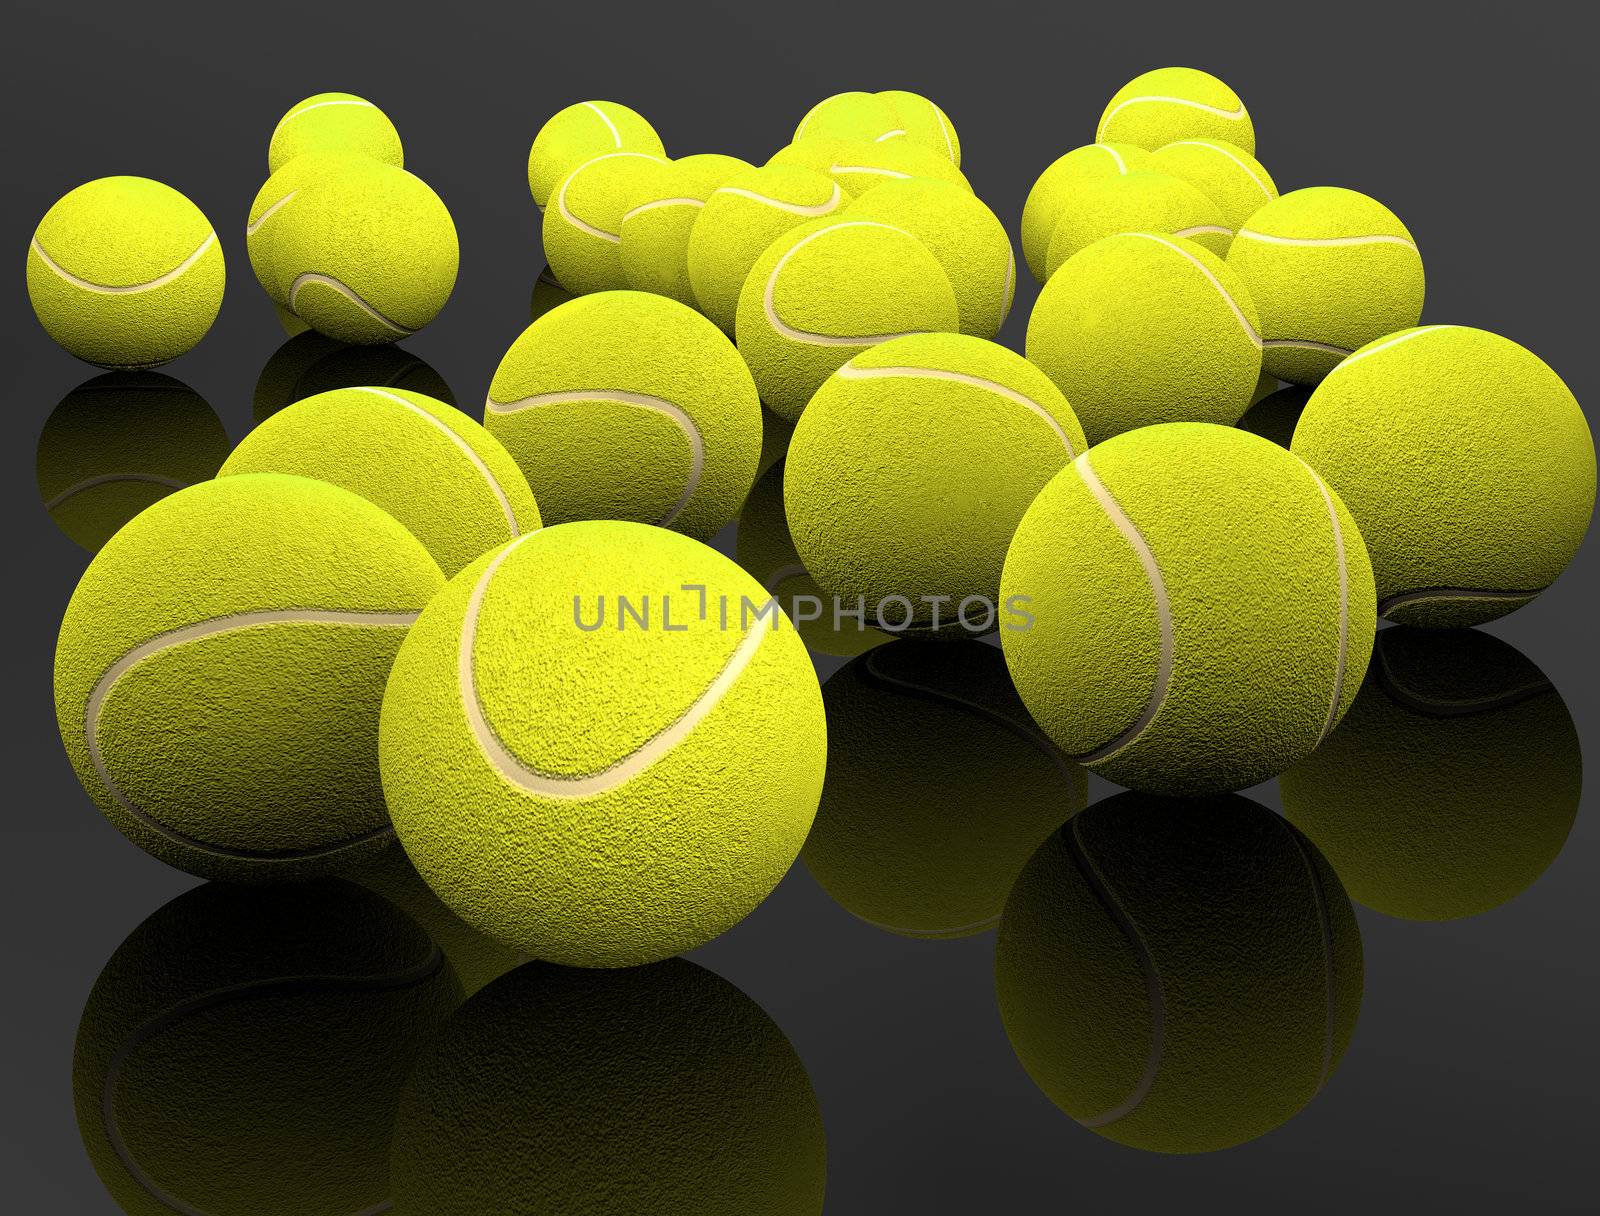 3d image of several tennis ball isolated in black background